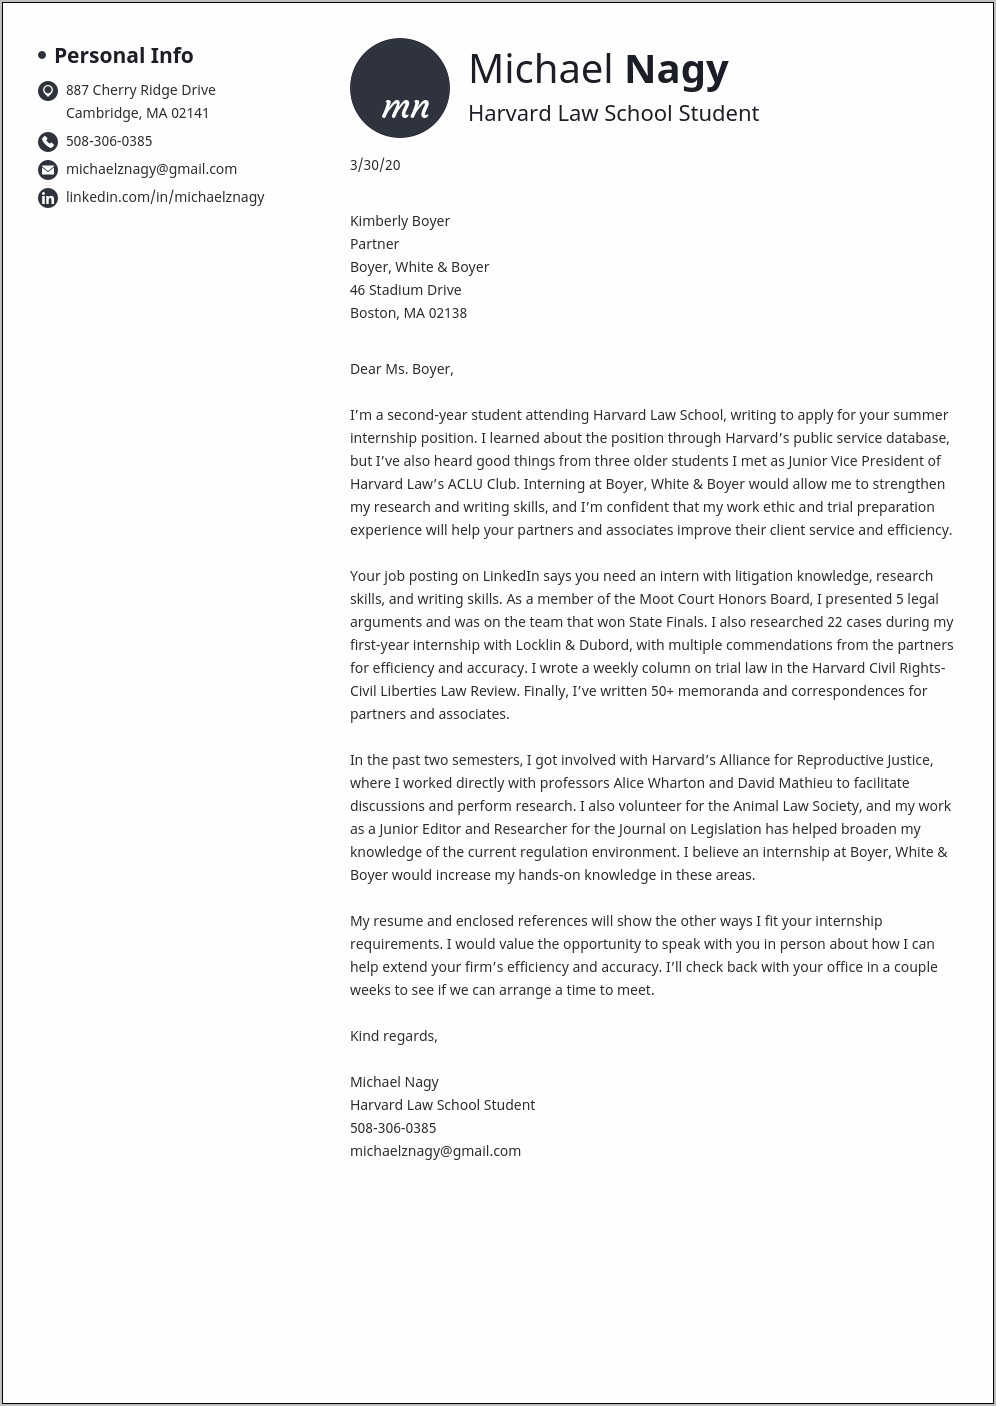 Professional Cover Letter And Resume Harvard